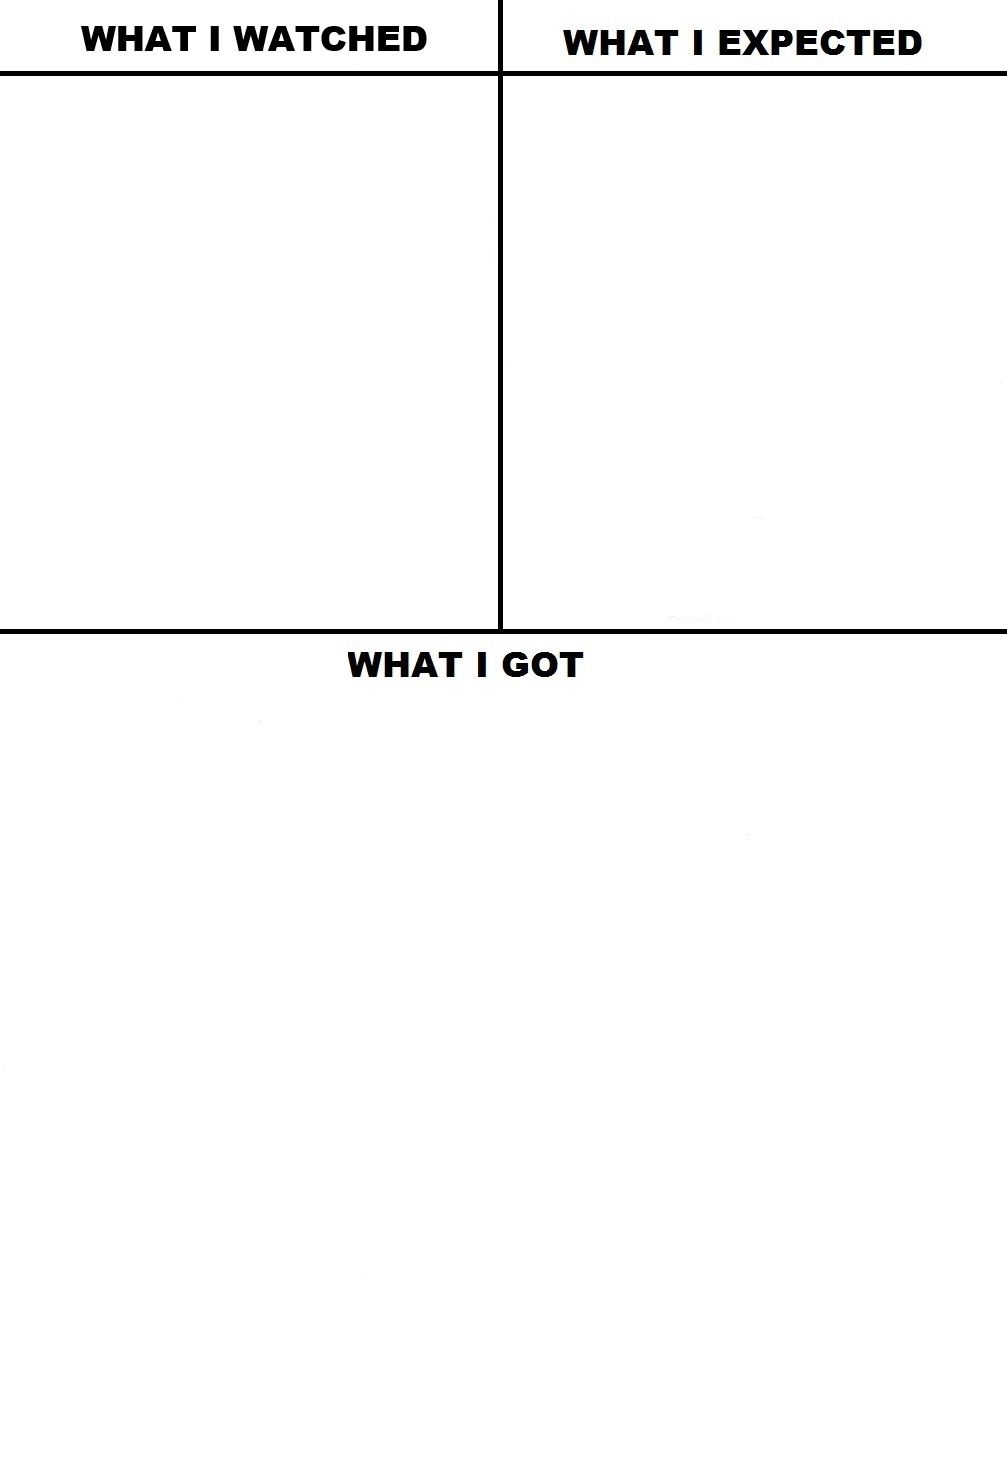 What I Watched/ What I Expected/ What I Got Blank Meme Template